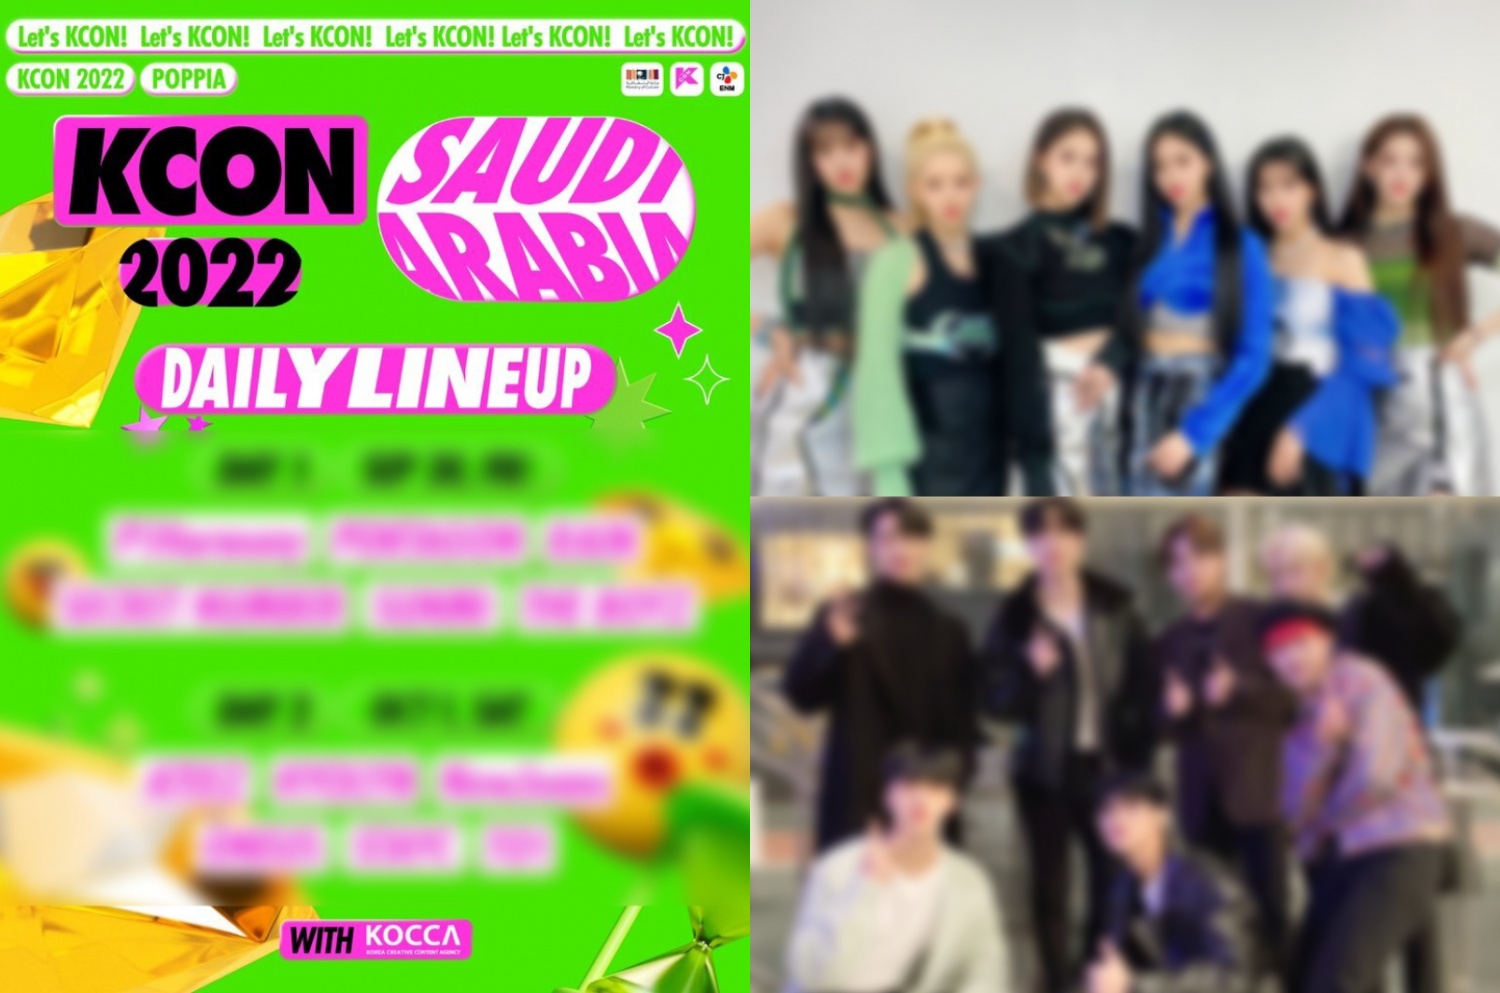 KCON 2022 Saudi Arabia – Which K-pop artists are performing?